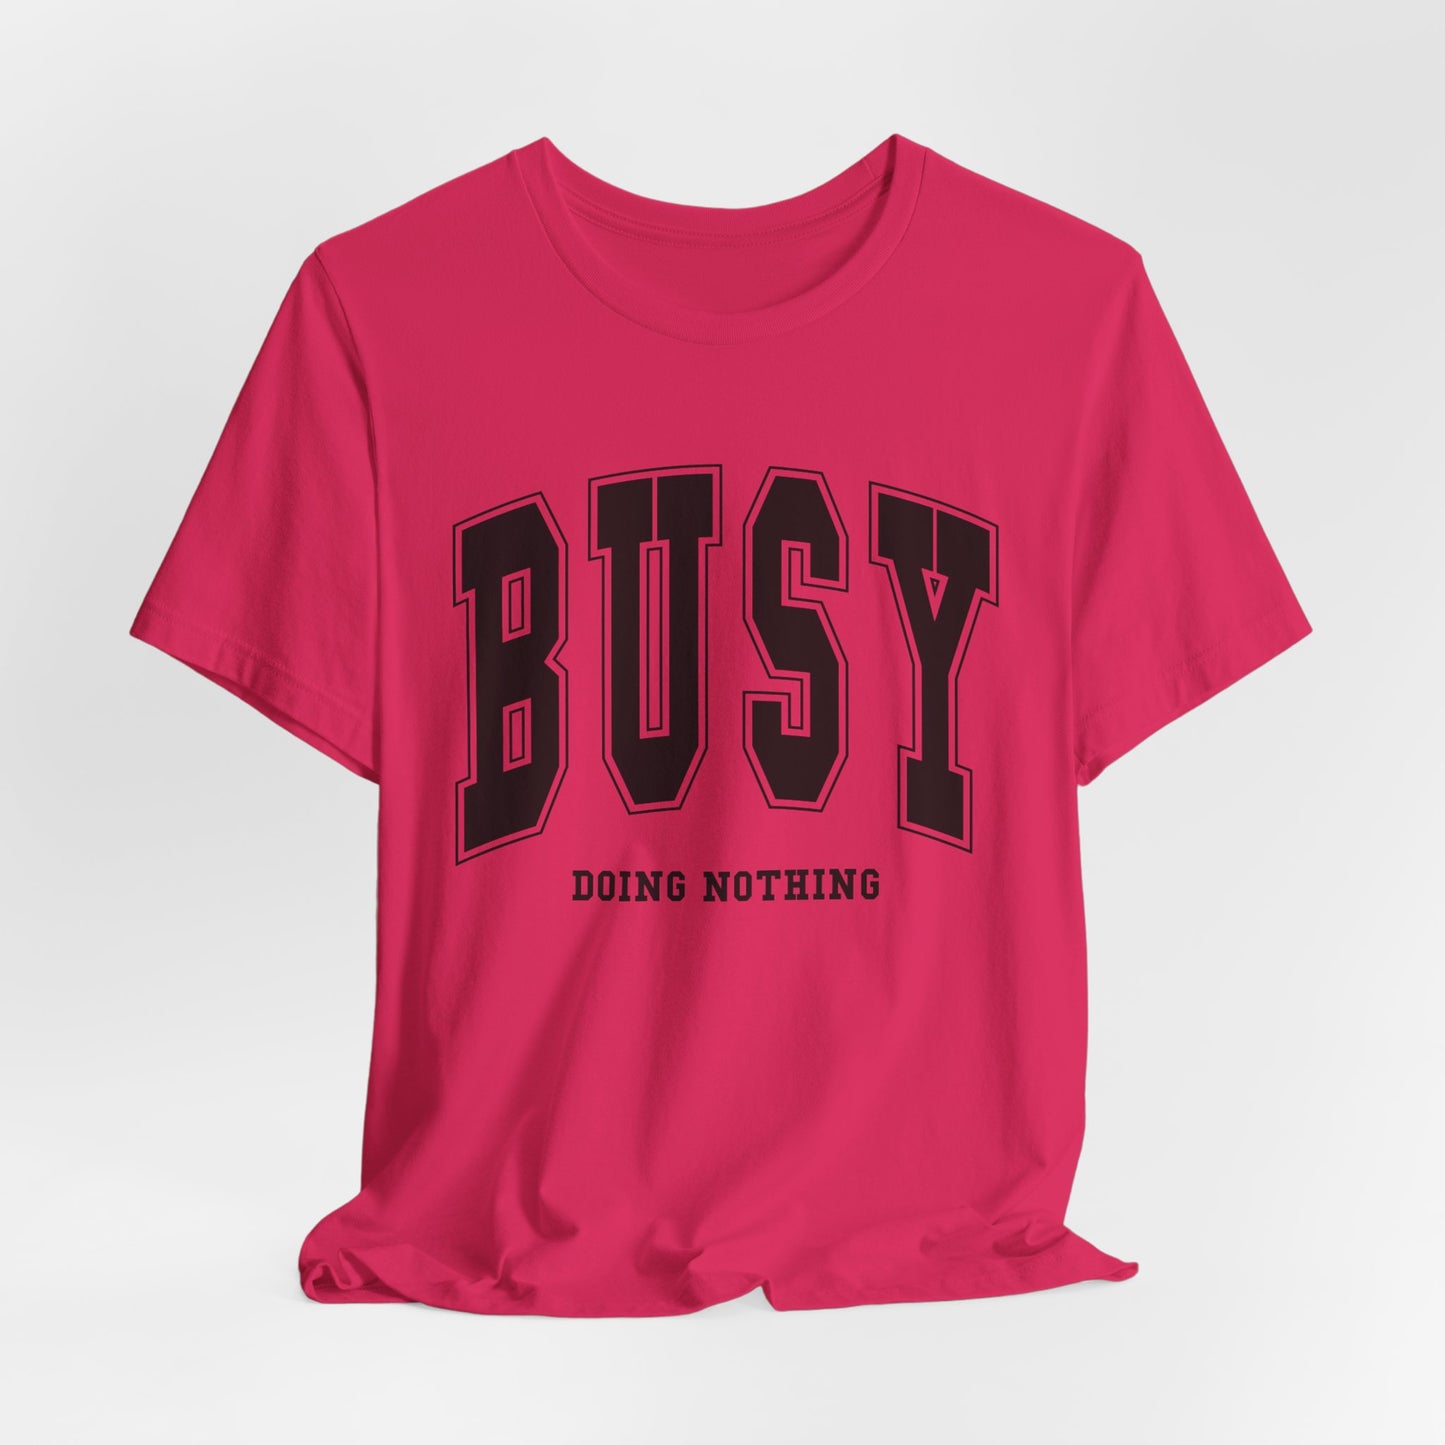 Busy Doing Nothing Funny Adult Unisex Short Sleeve Tee